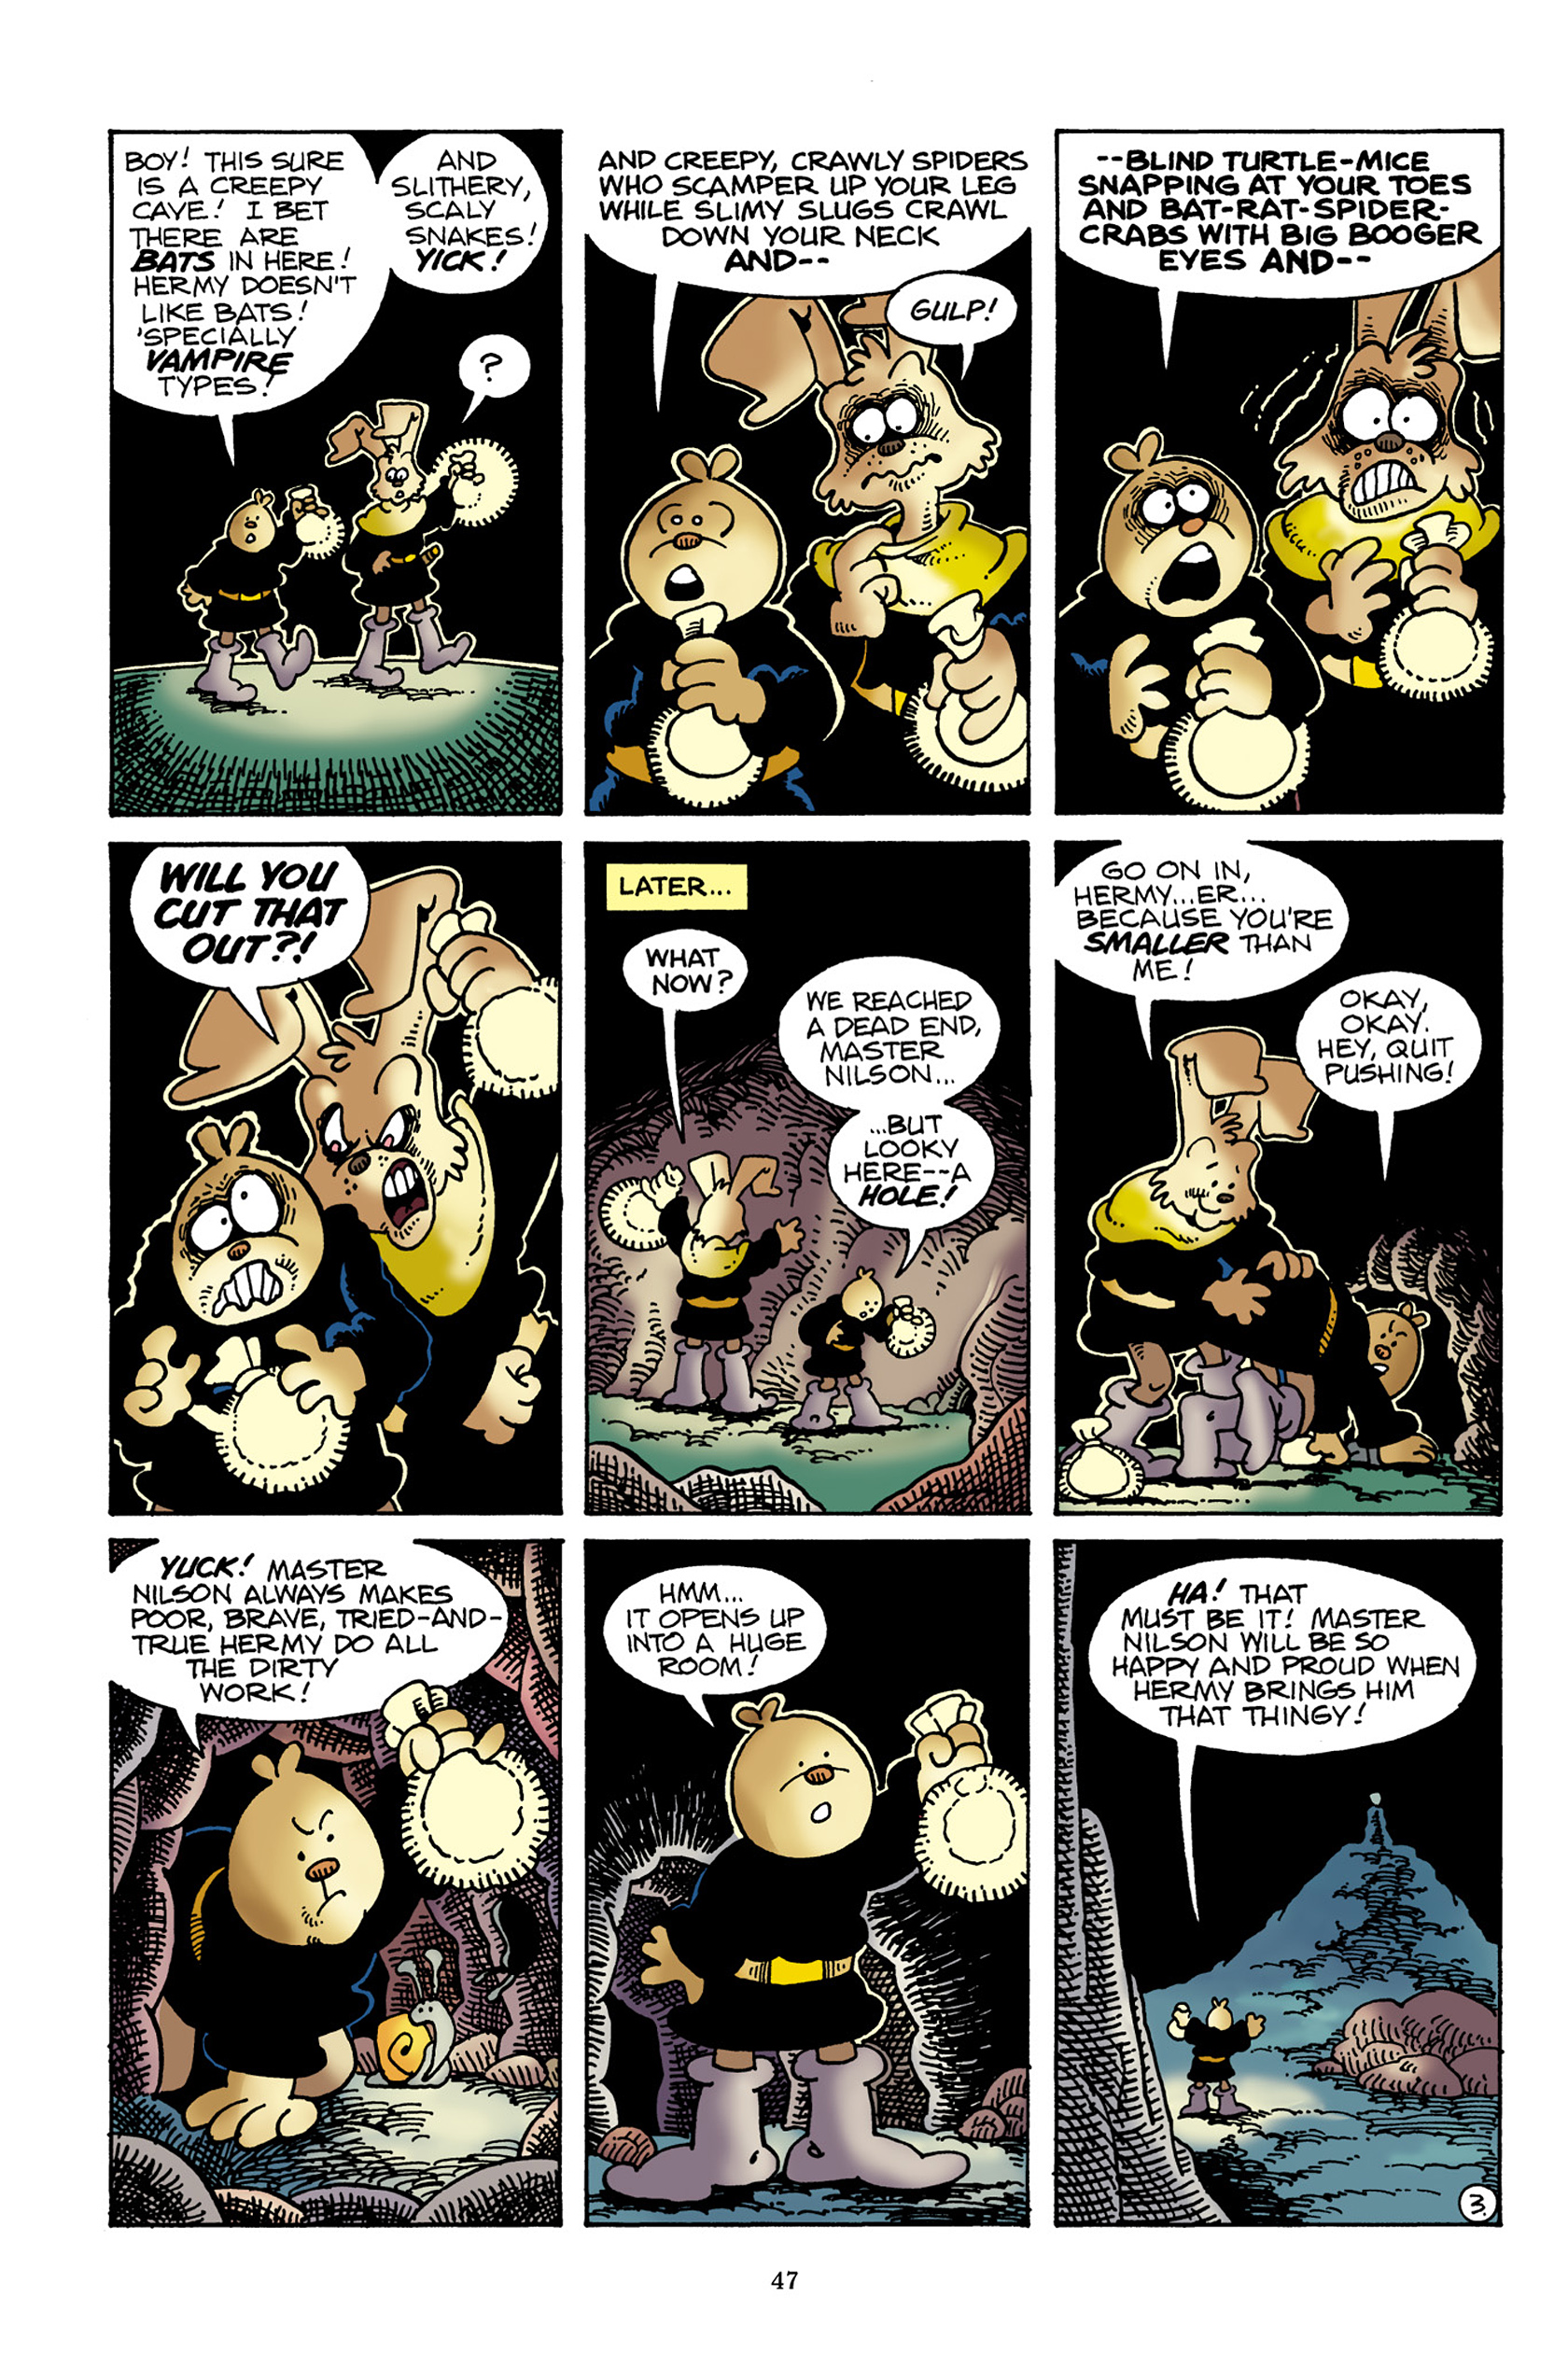 The Adventures of Nilson Groundthumper and Hermy TPB #1 - English 47